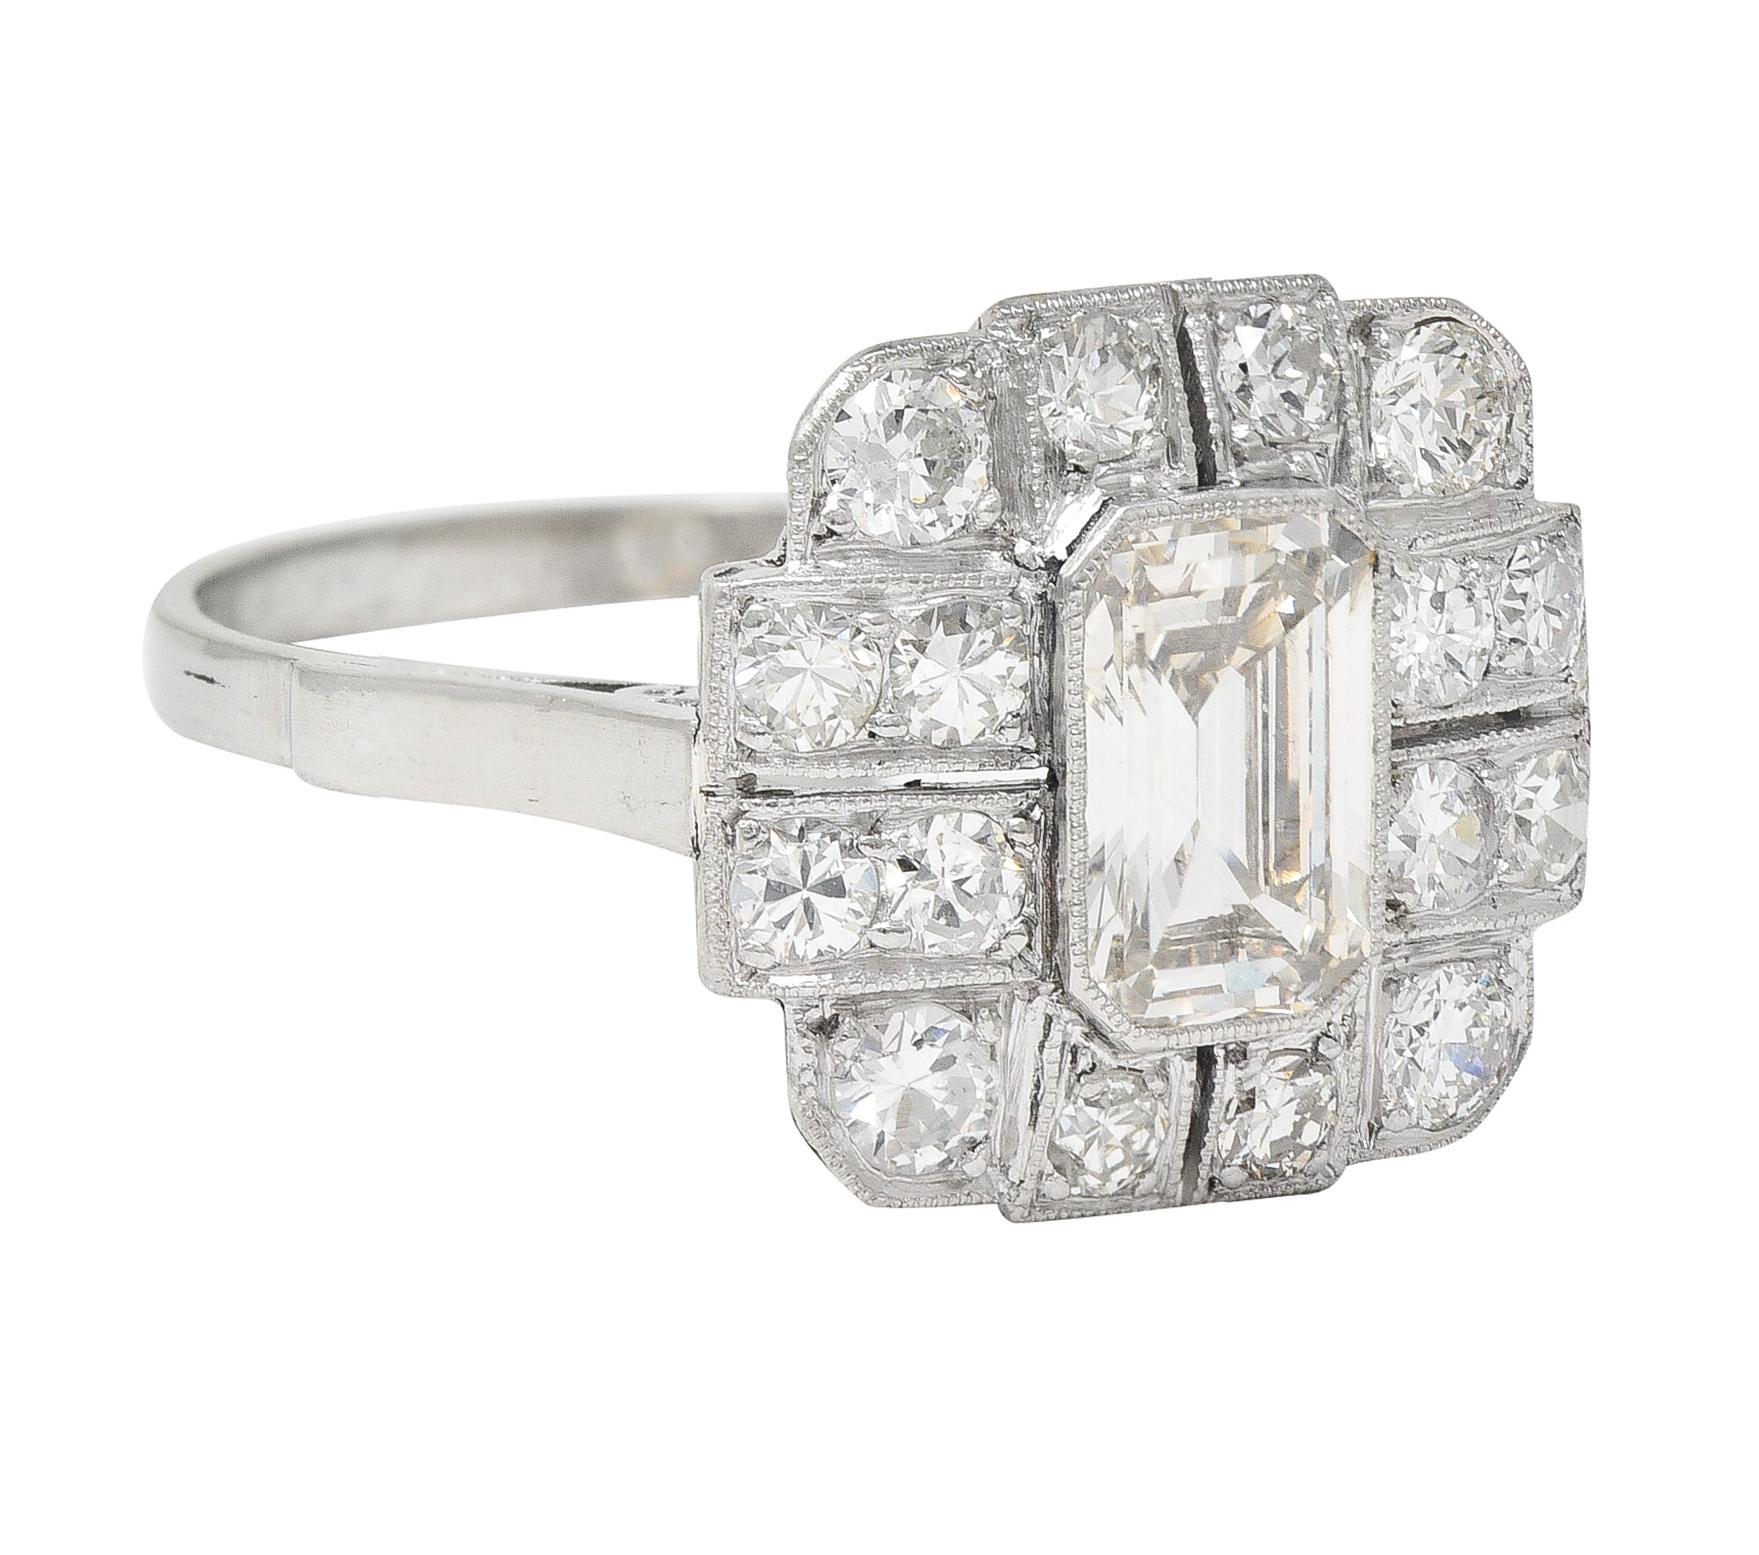 Centering an emerald cut diamond weighing approximately 1.18 carats - M color with VS1 clarity
Set in a milgrain bezel with a pierced geometric surround 
Bead set with old European and single cut diamonds
Weighing approximately 0.92 carats total -